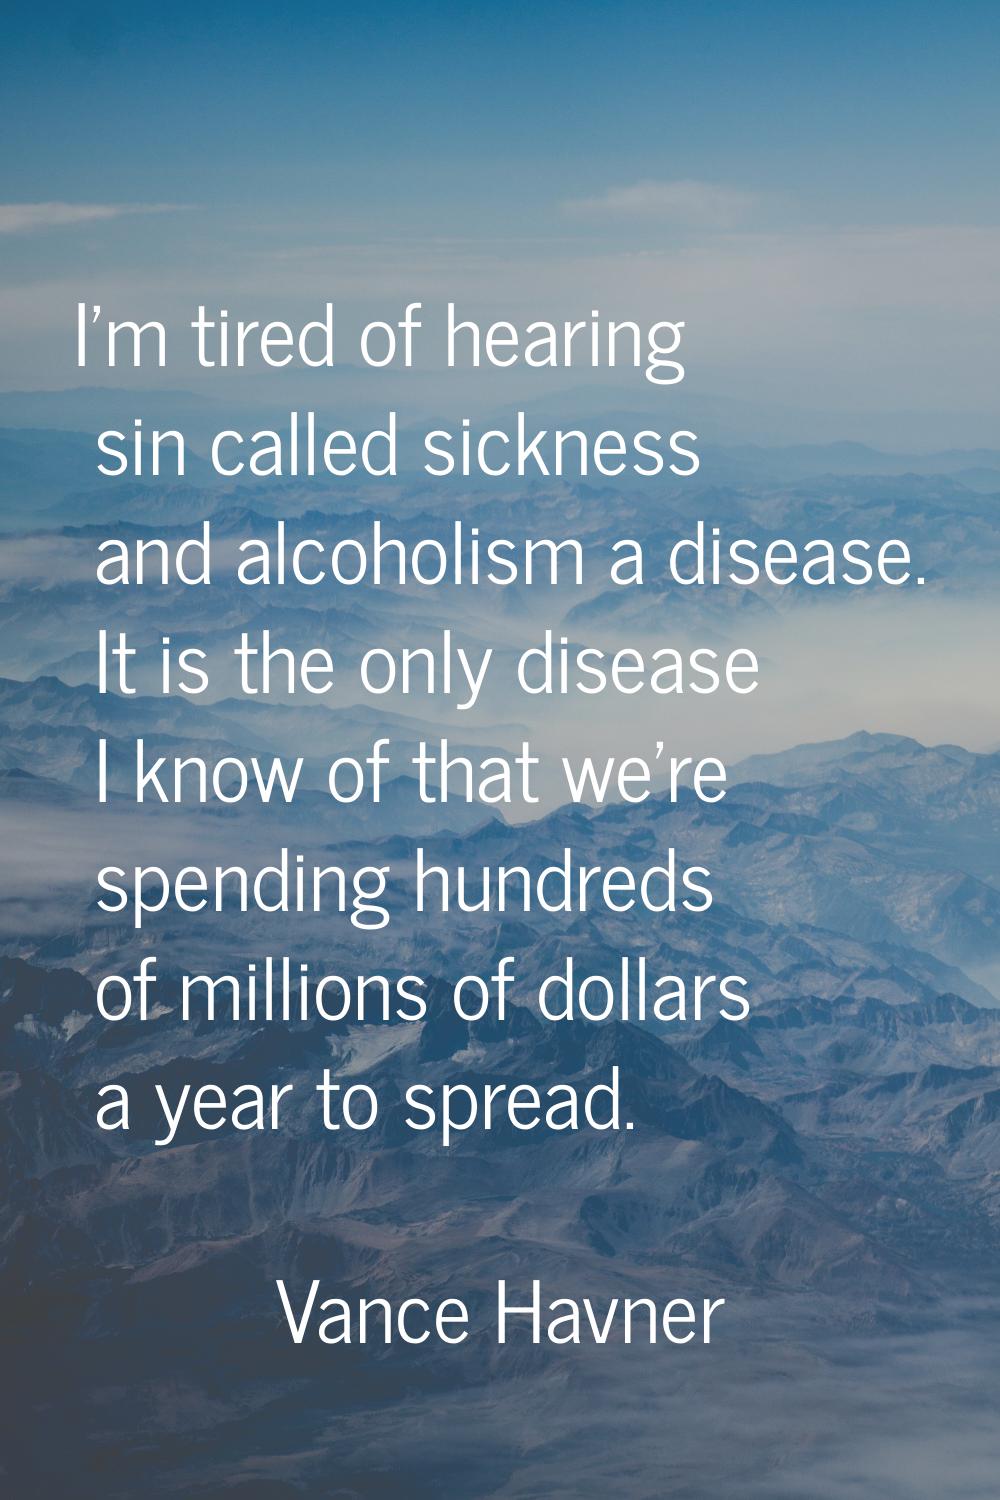 I'm tired of hearing sin called sickness and alcoholism a disease. It is the only disease I know of